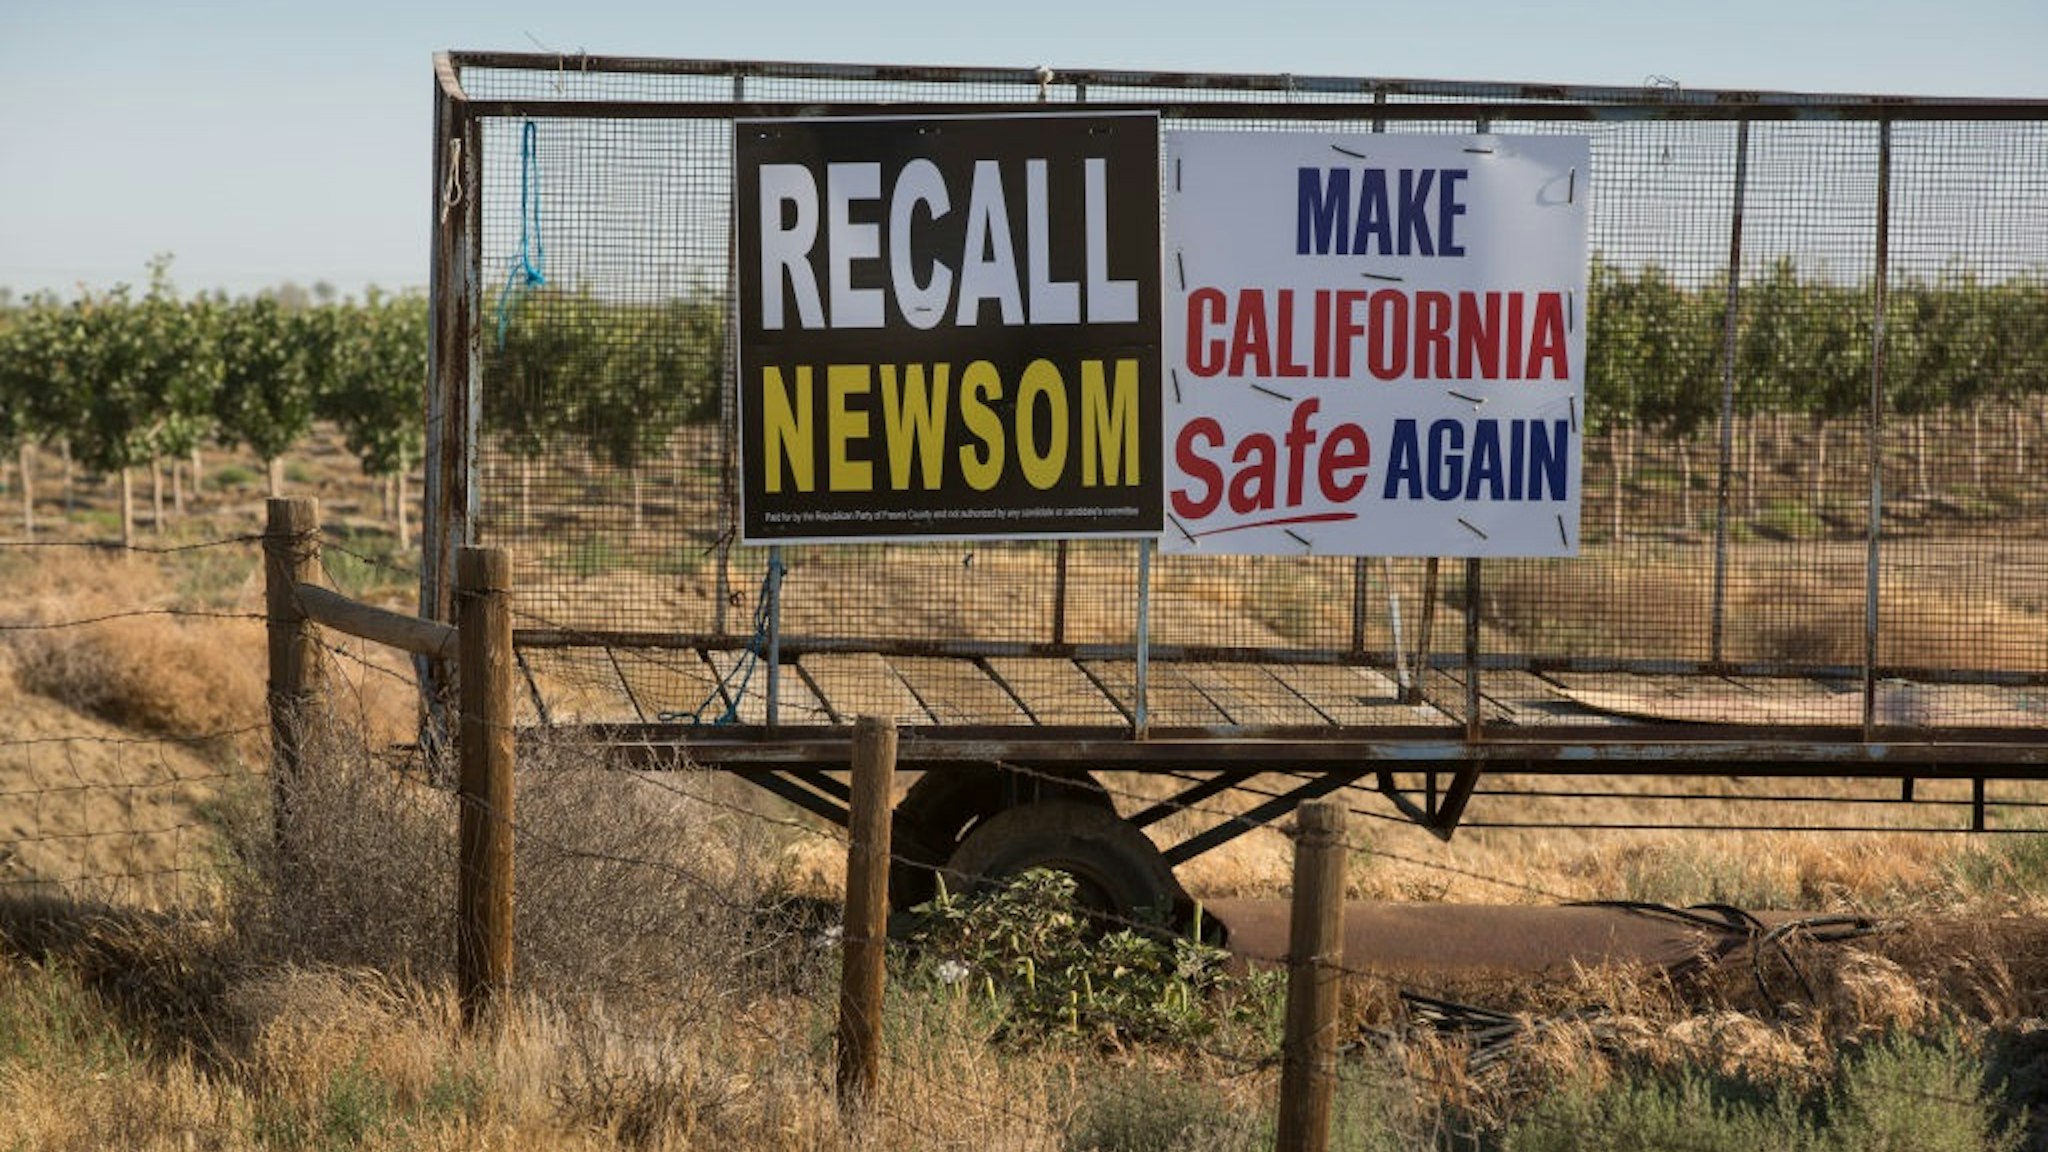 GUSTINE, CA - MAY 31: A "Recall Newsom" and "Make California Safe Again" political sign is planted in a barren field along Interstate 5 as viewed on May 31, 2021, near Gustine, California.